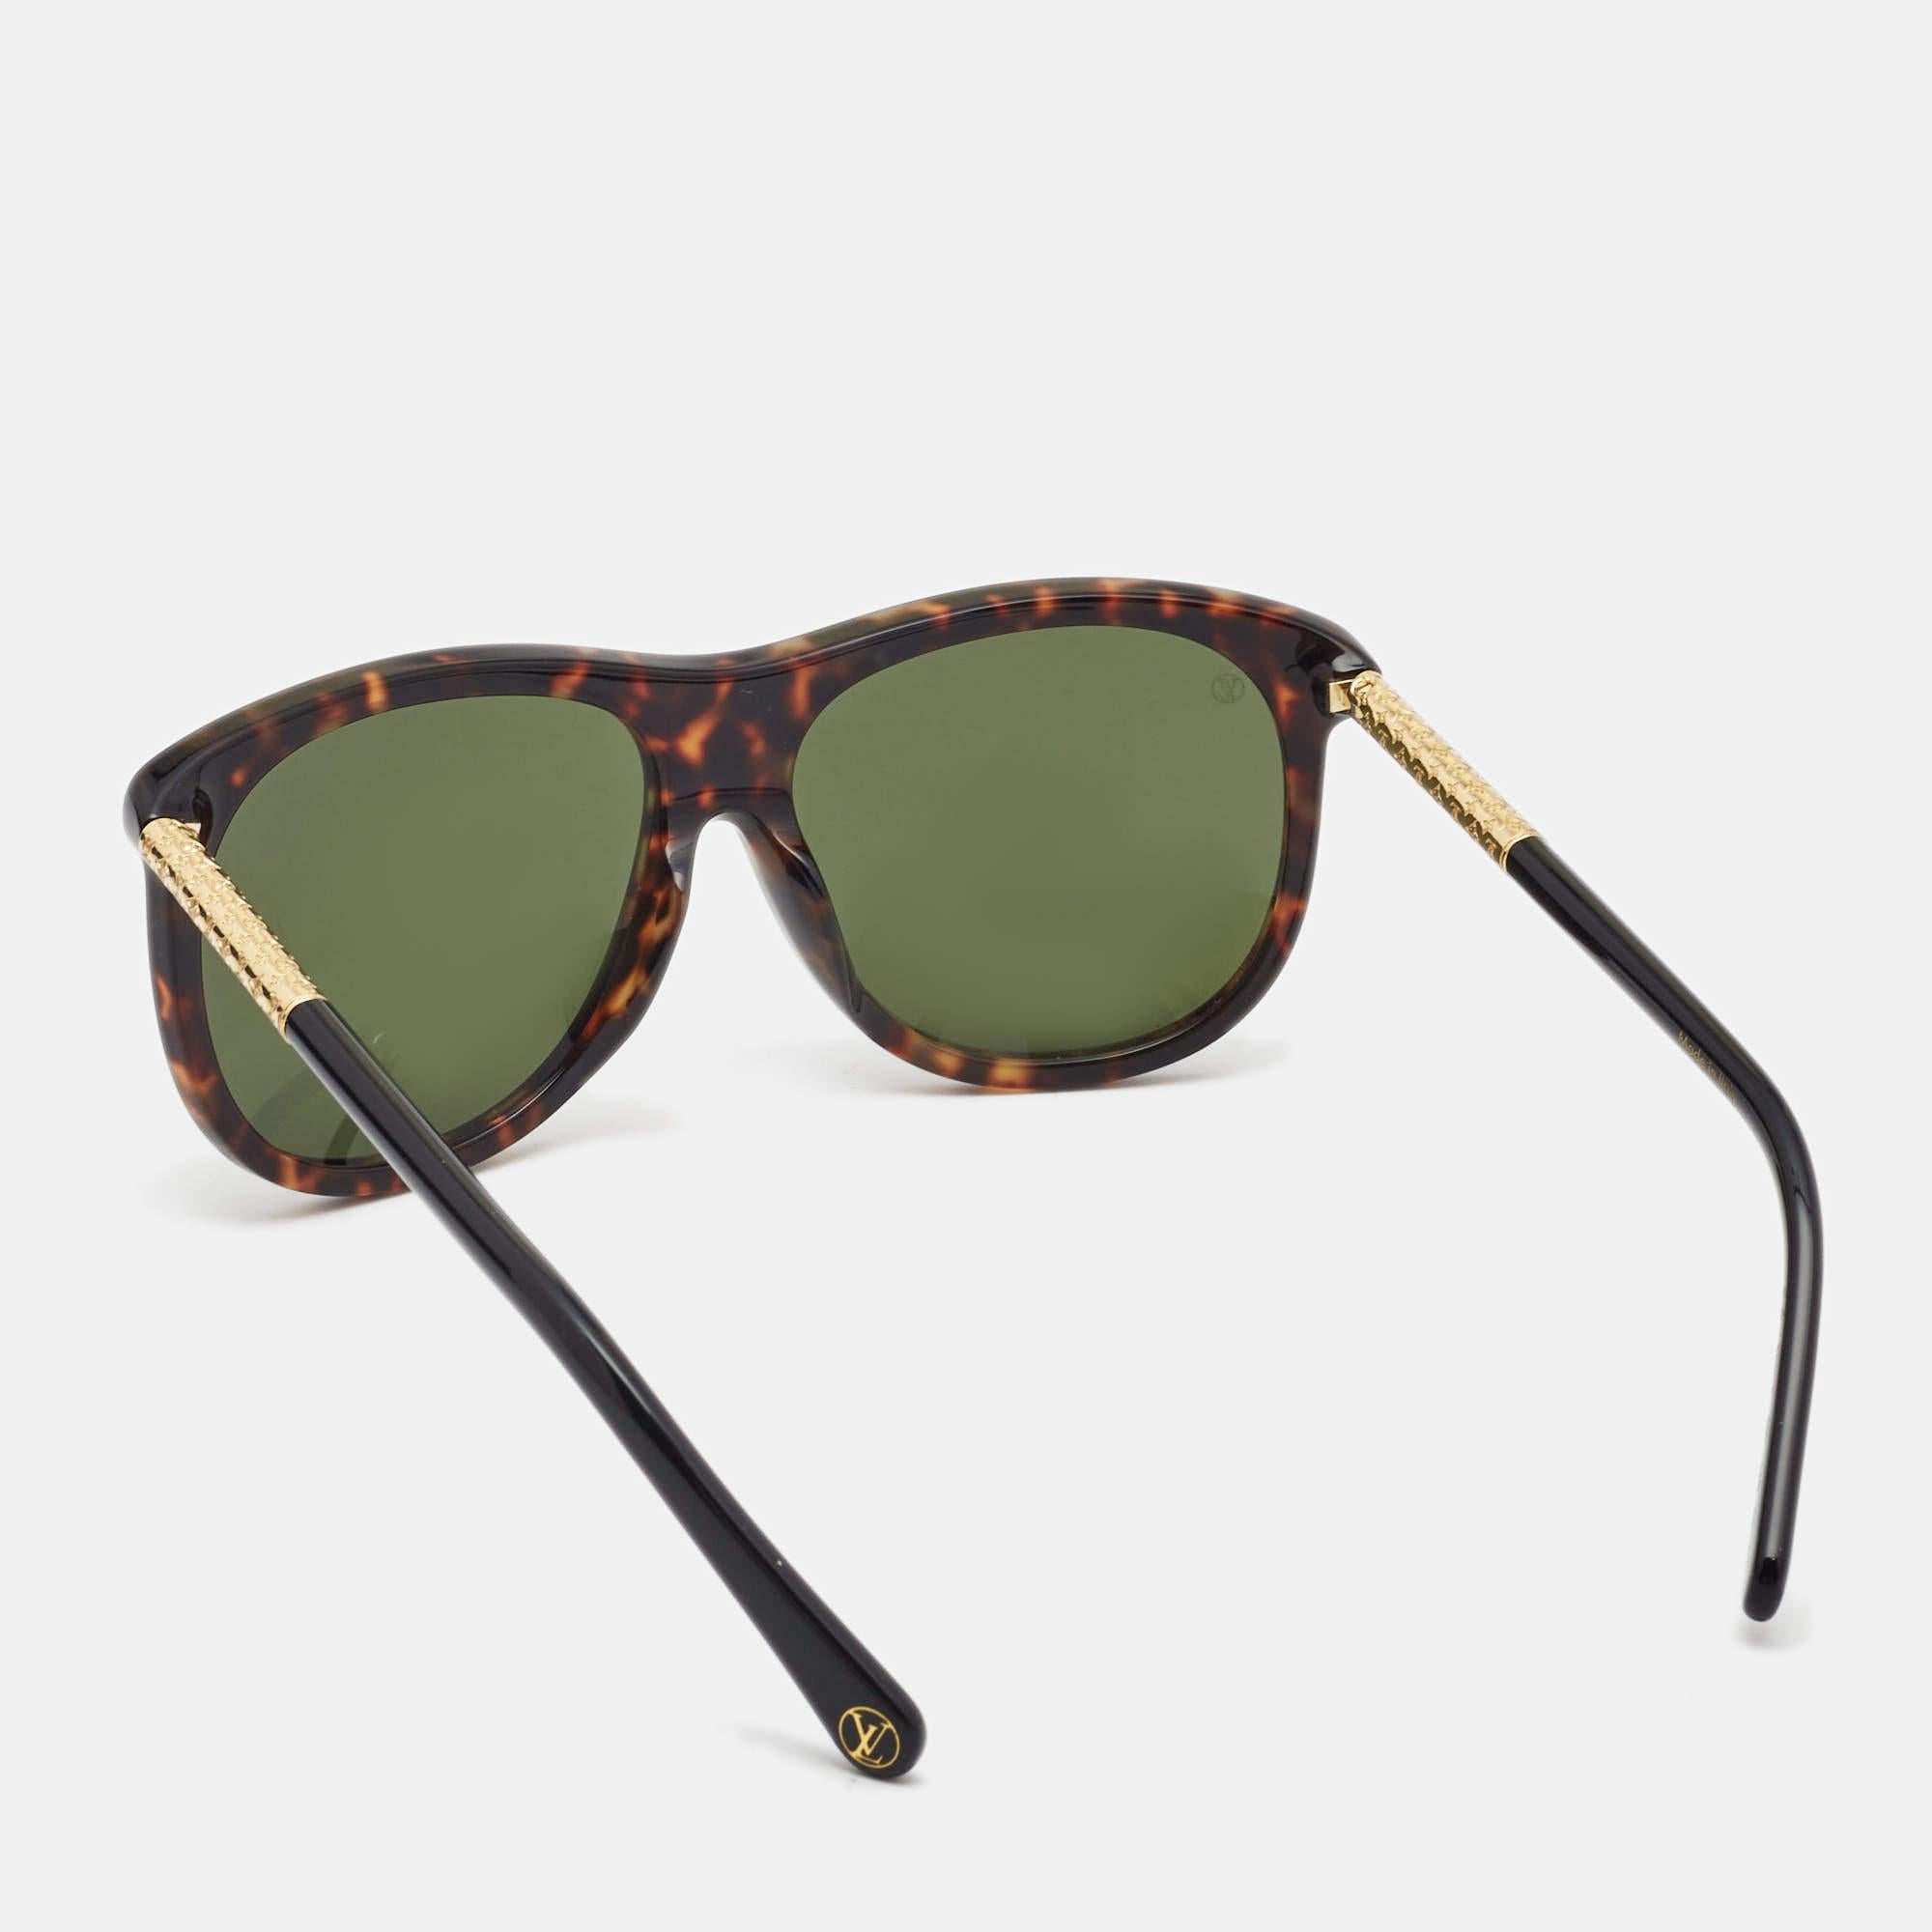 Embrace sunny days in full style with the help of this pair of Louis Vuitton sunglasses. Created with expertise, the luxe sunglasses feature a well-designed frame and high-grade lenses that are equipped to protect your eyes.

Includes: Original